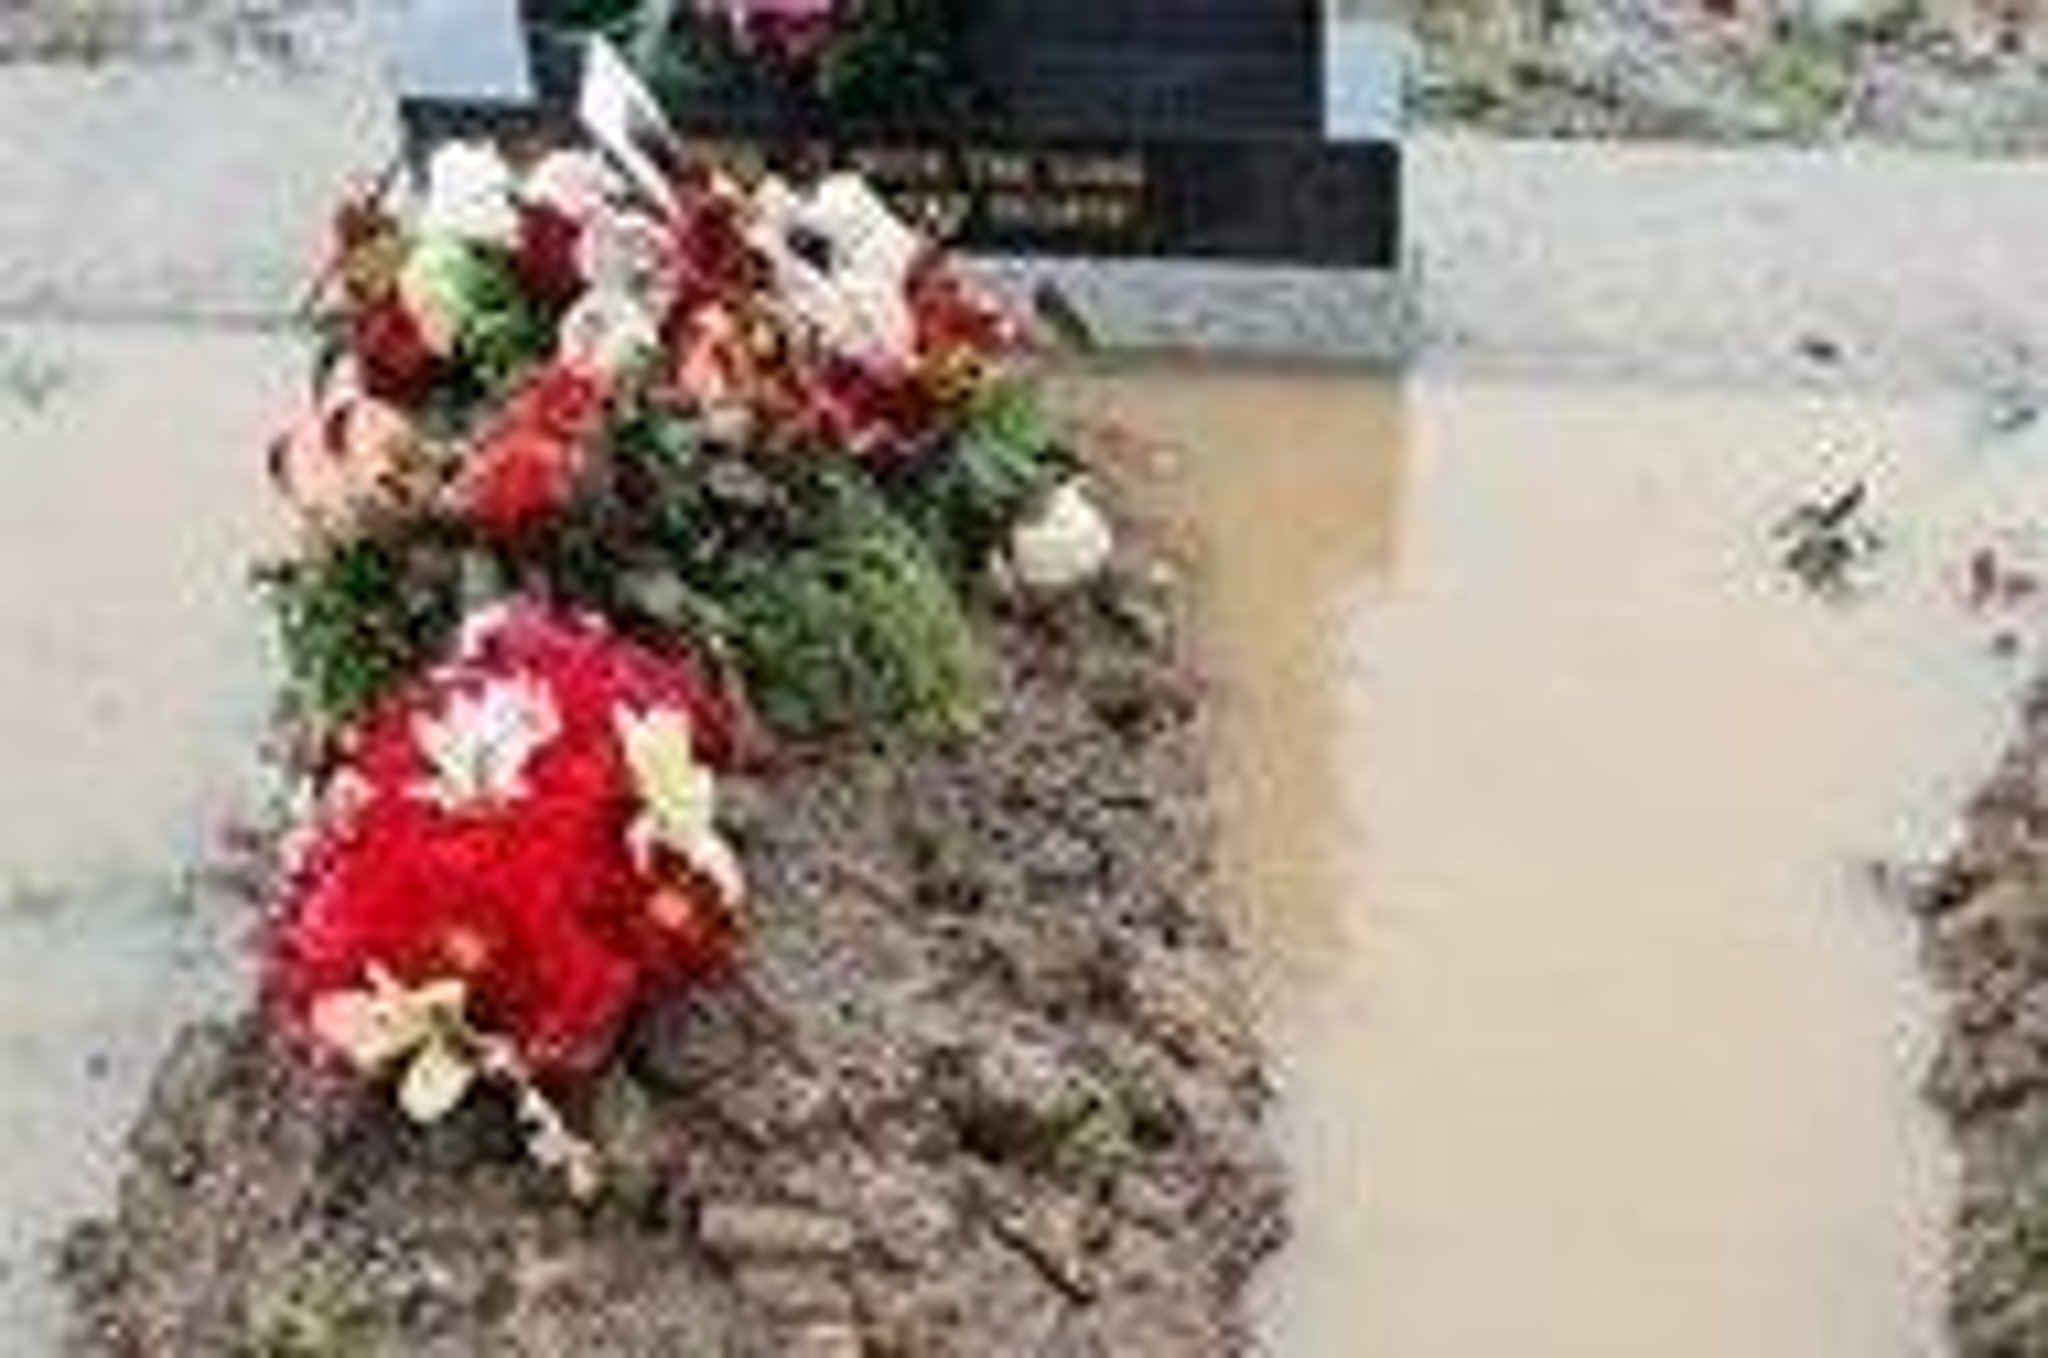 Widower's anguish as wife's grave is flooded